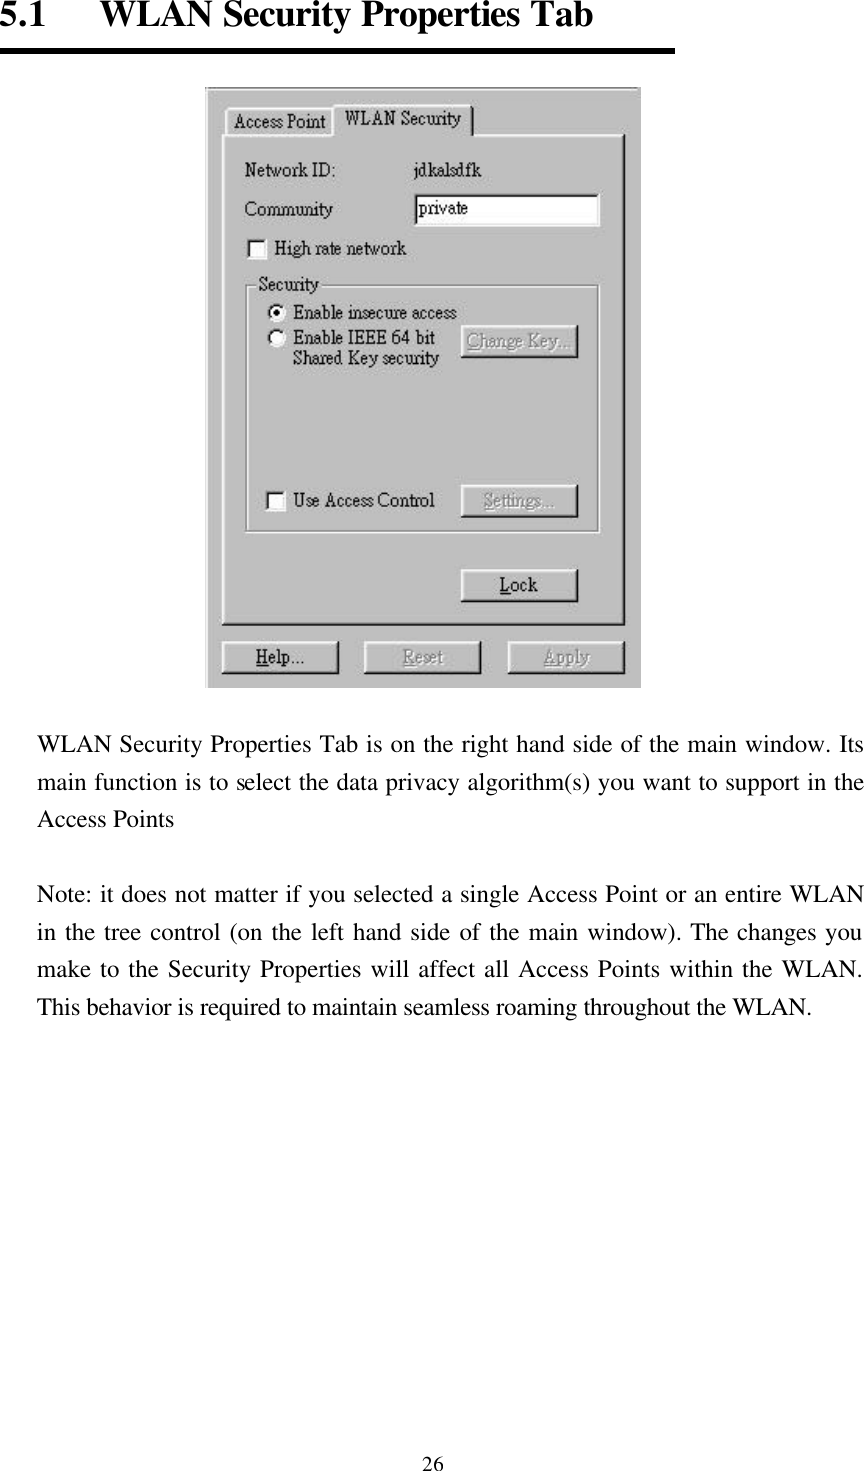  265.1   WLAN Security Properties Tab   WLAN Security Properties Tab is on the right hand side of the main window. Its main function is to select the data privacy algorithm(s) you want to support in the Access Points  Note: it does not matter if you selected a single Access Point or an entire WLAN in the tree control (on the left hand side of the main window). The changes you make to the Security Properties will affect all Access Points within the WLAN. This behavior is required to maintain seamless roaming throughout the WLAN.     